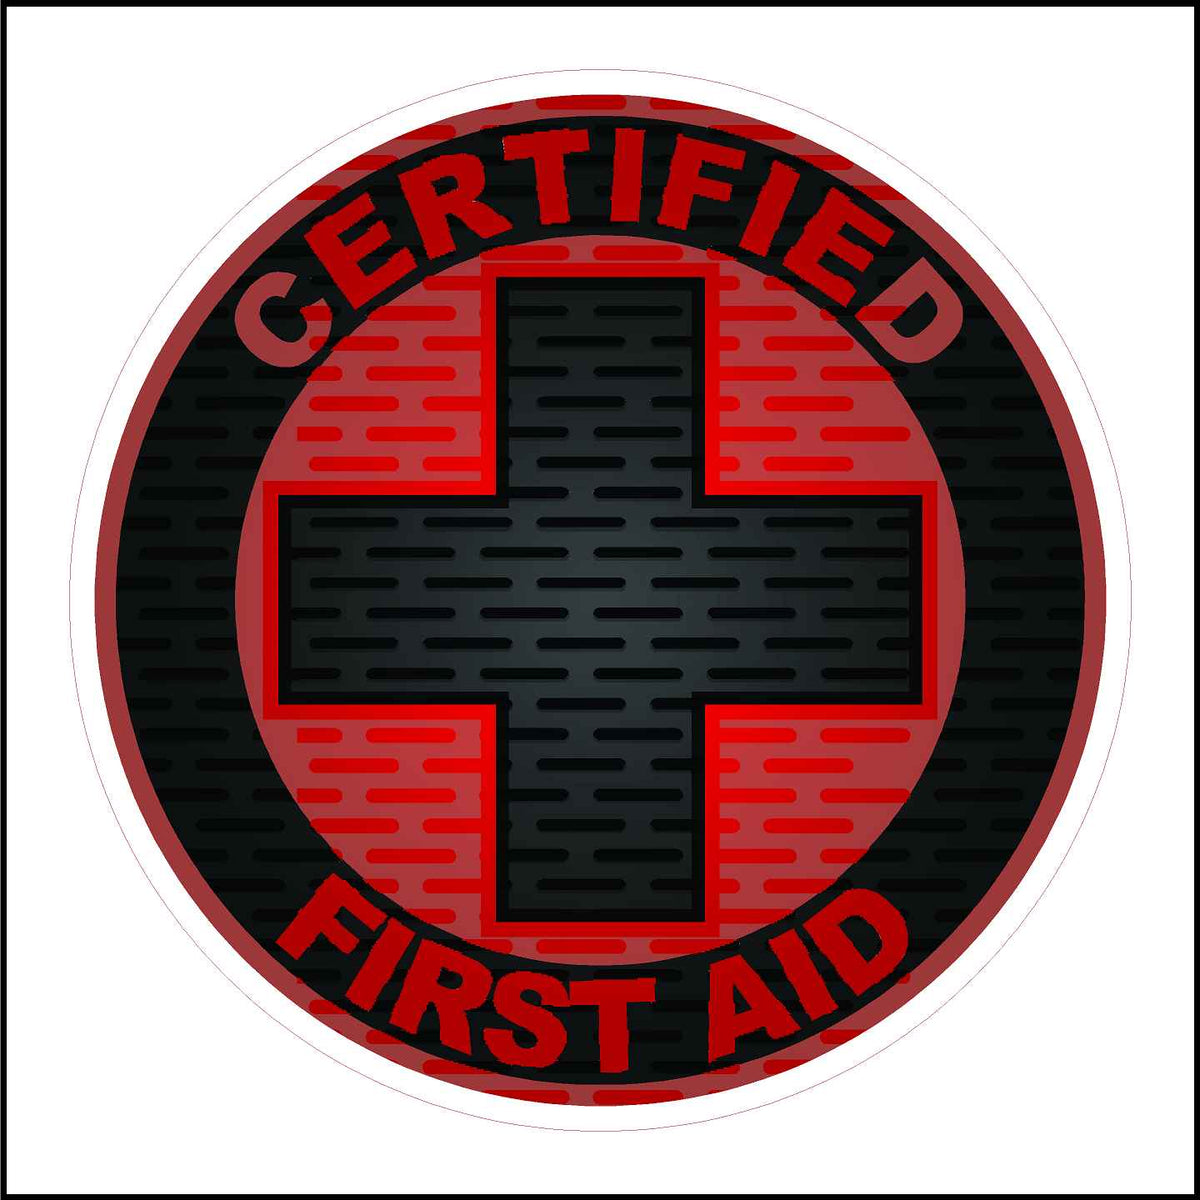 Certified first aid sticker printed in red and black. 2 inch diameter.